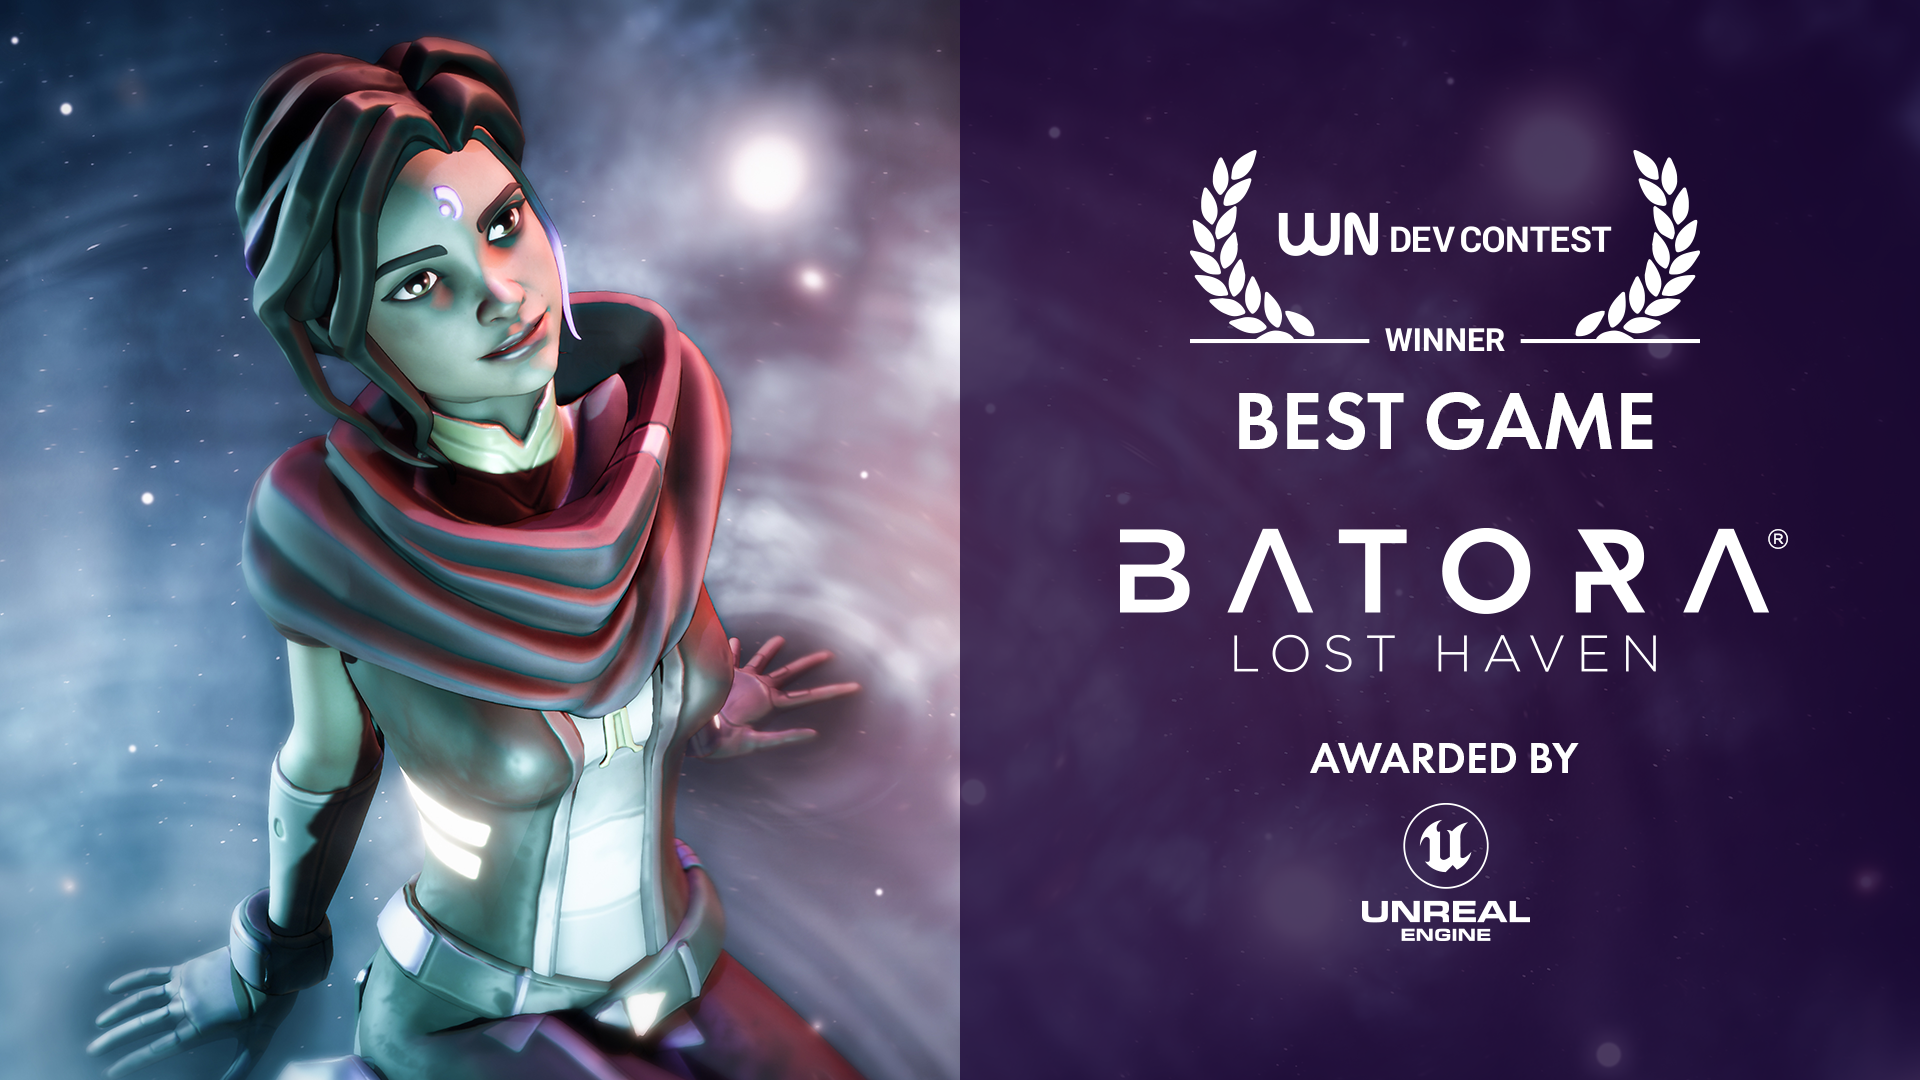 Batora: Lost Haven won the Best Game Award by Epic Games at the WN Dev Contest 2021!